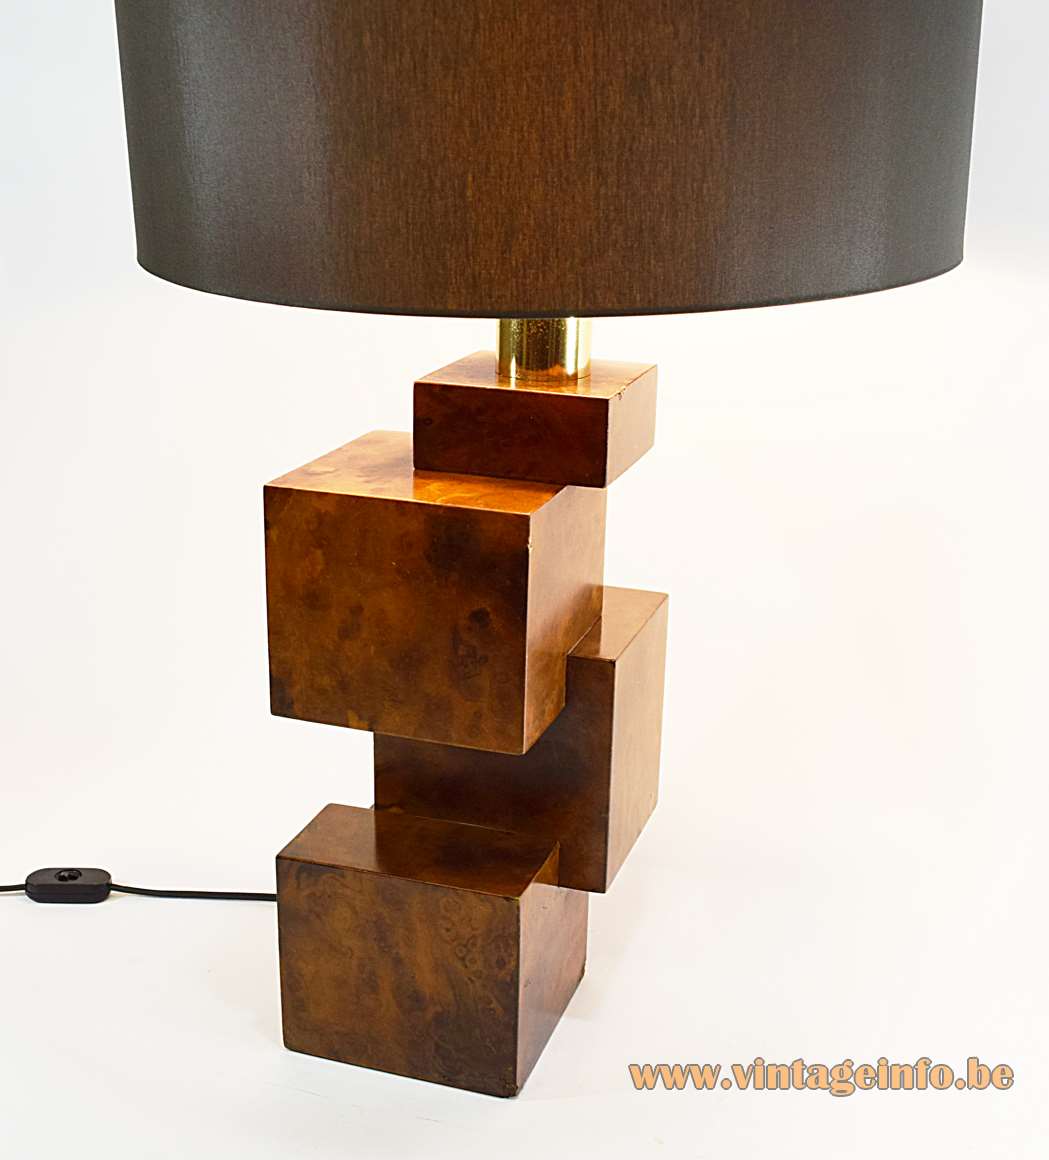 Burr walnut cityscape table lamp geometric wood cubes base round brown tubular lampshade 1960s 1970s Italy